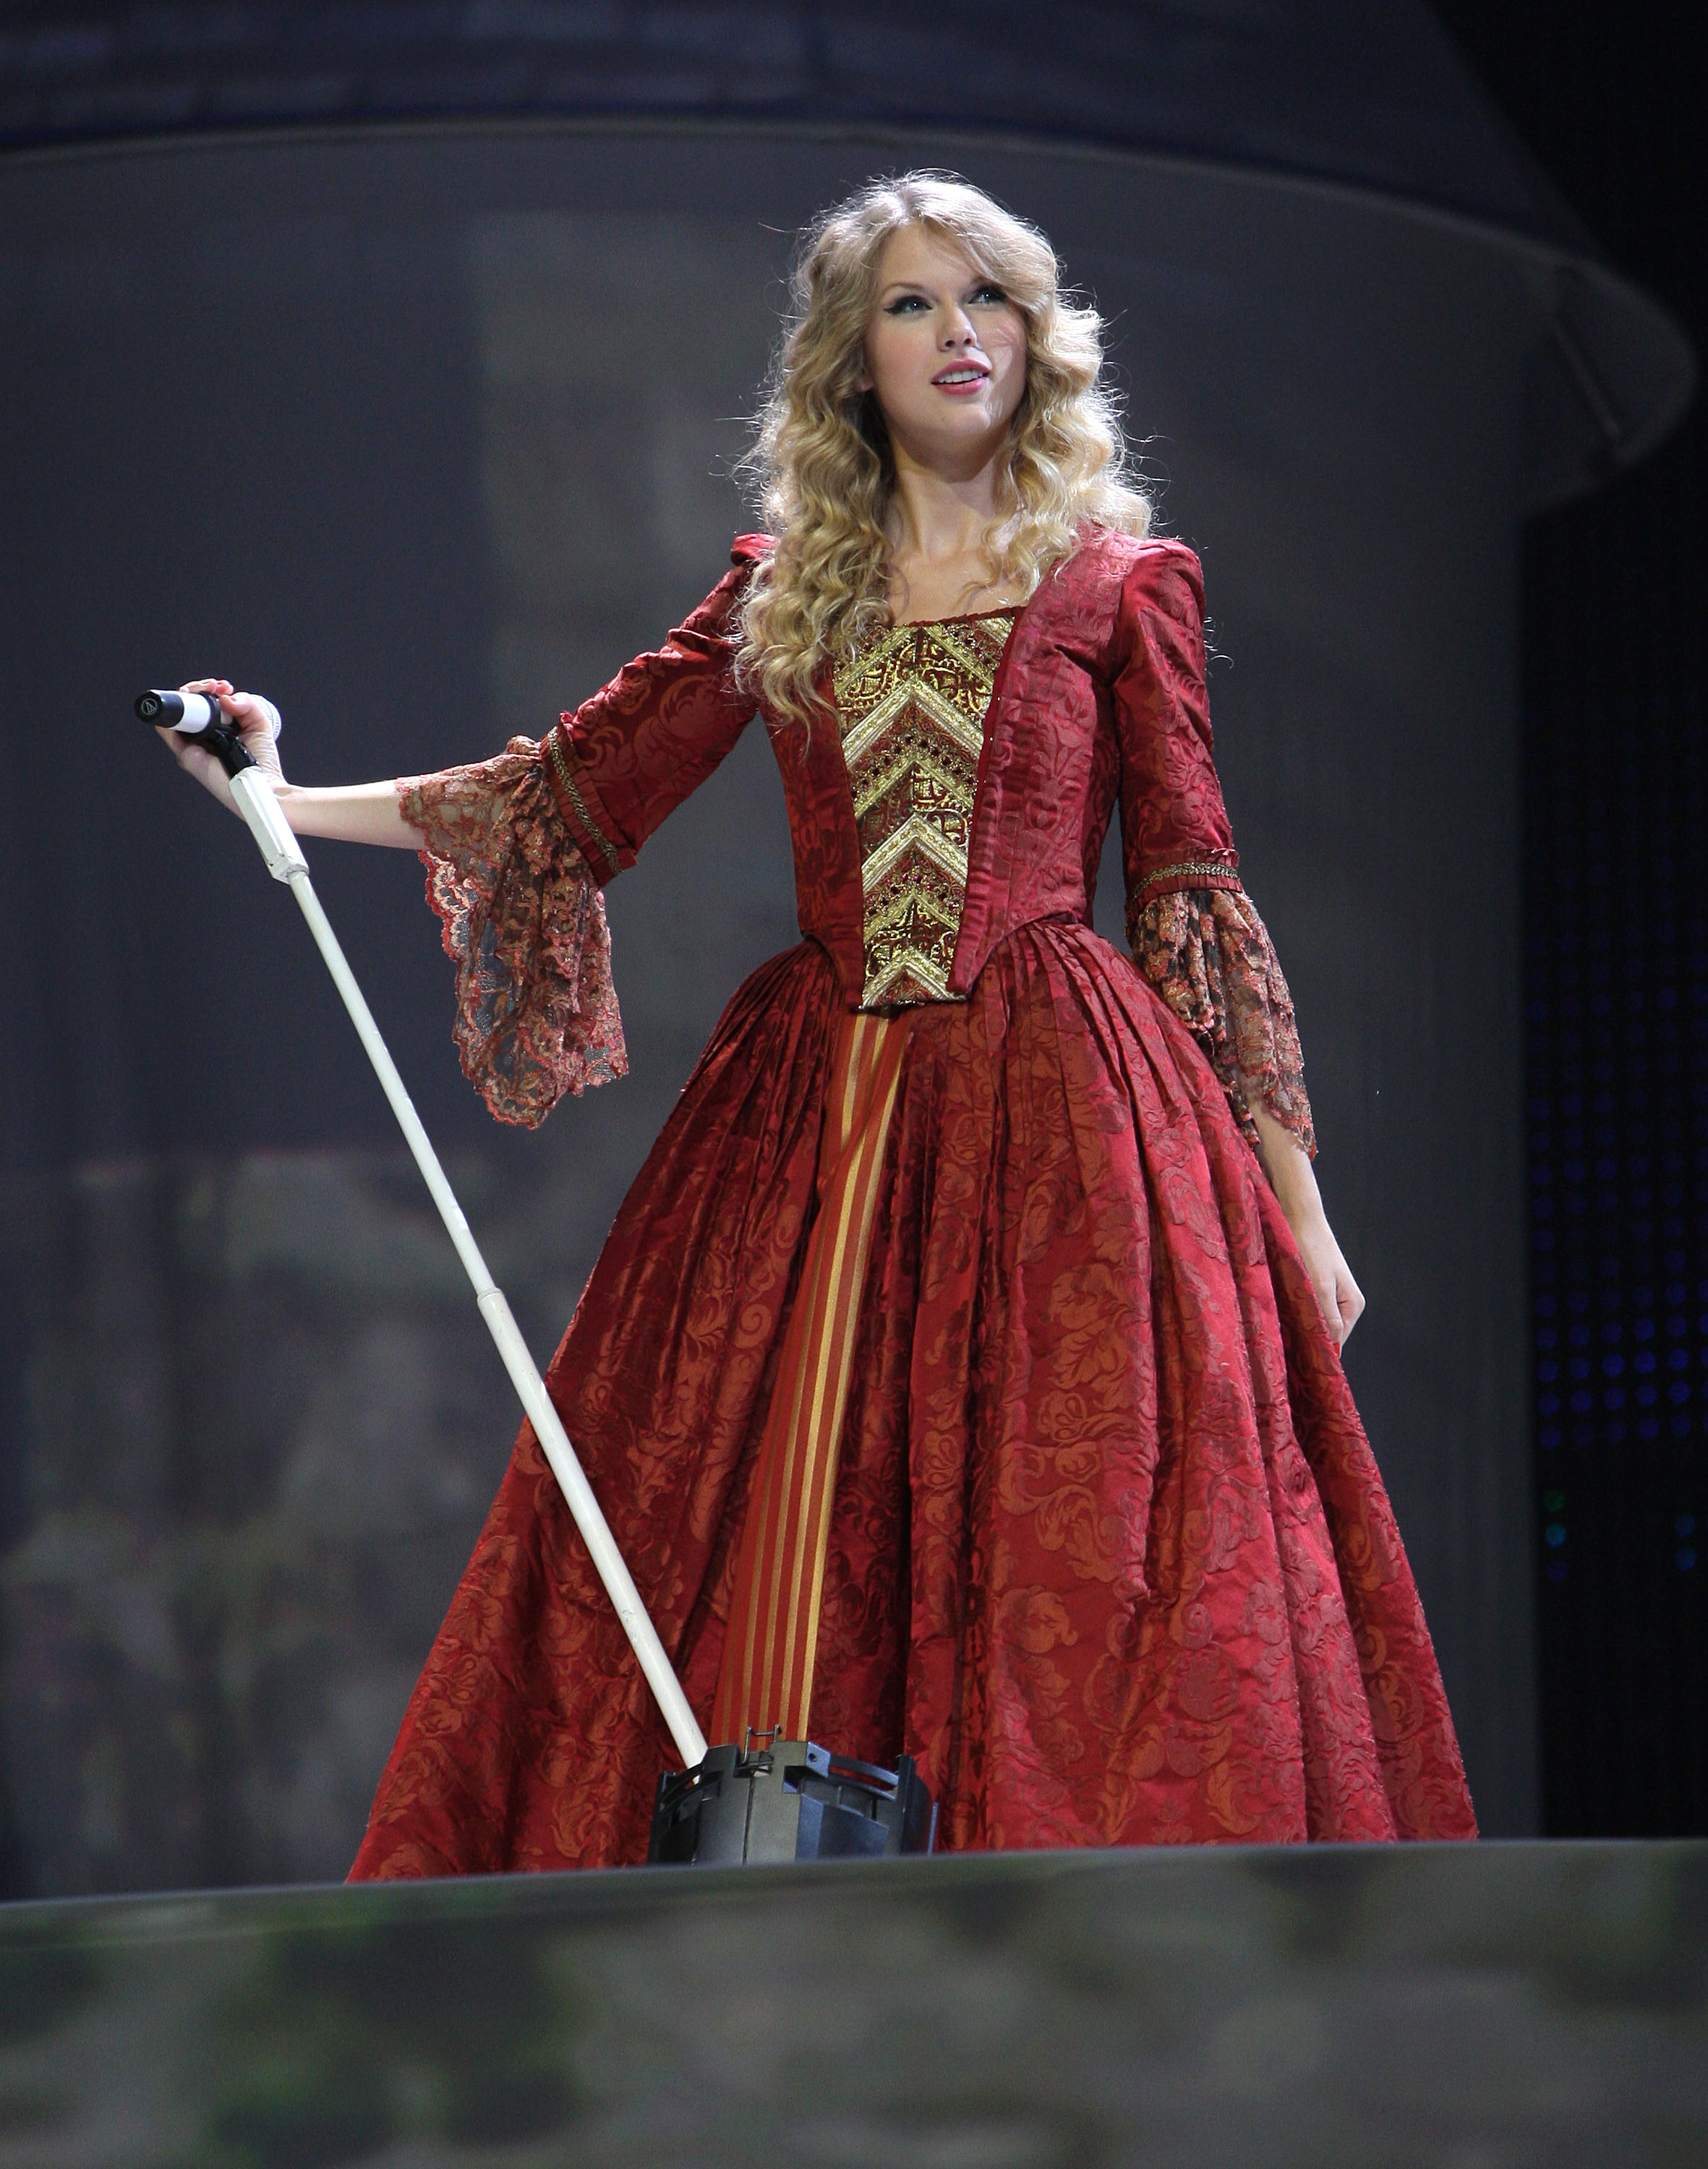 Taylor during the Fearless Tour at Madison Square Garden in 2009 in New York City